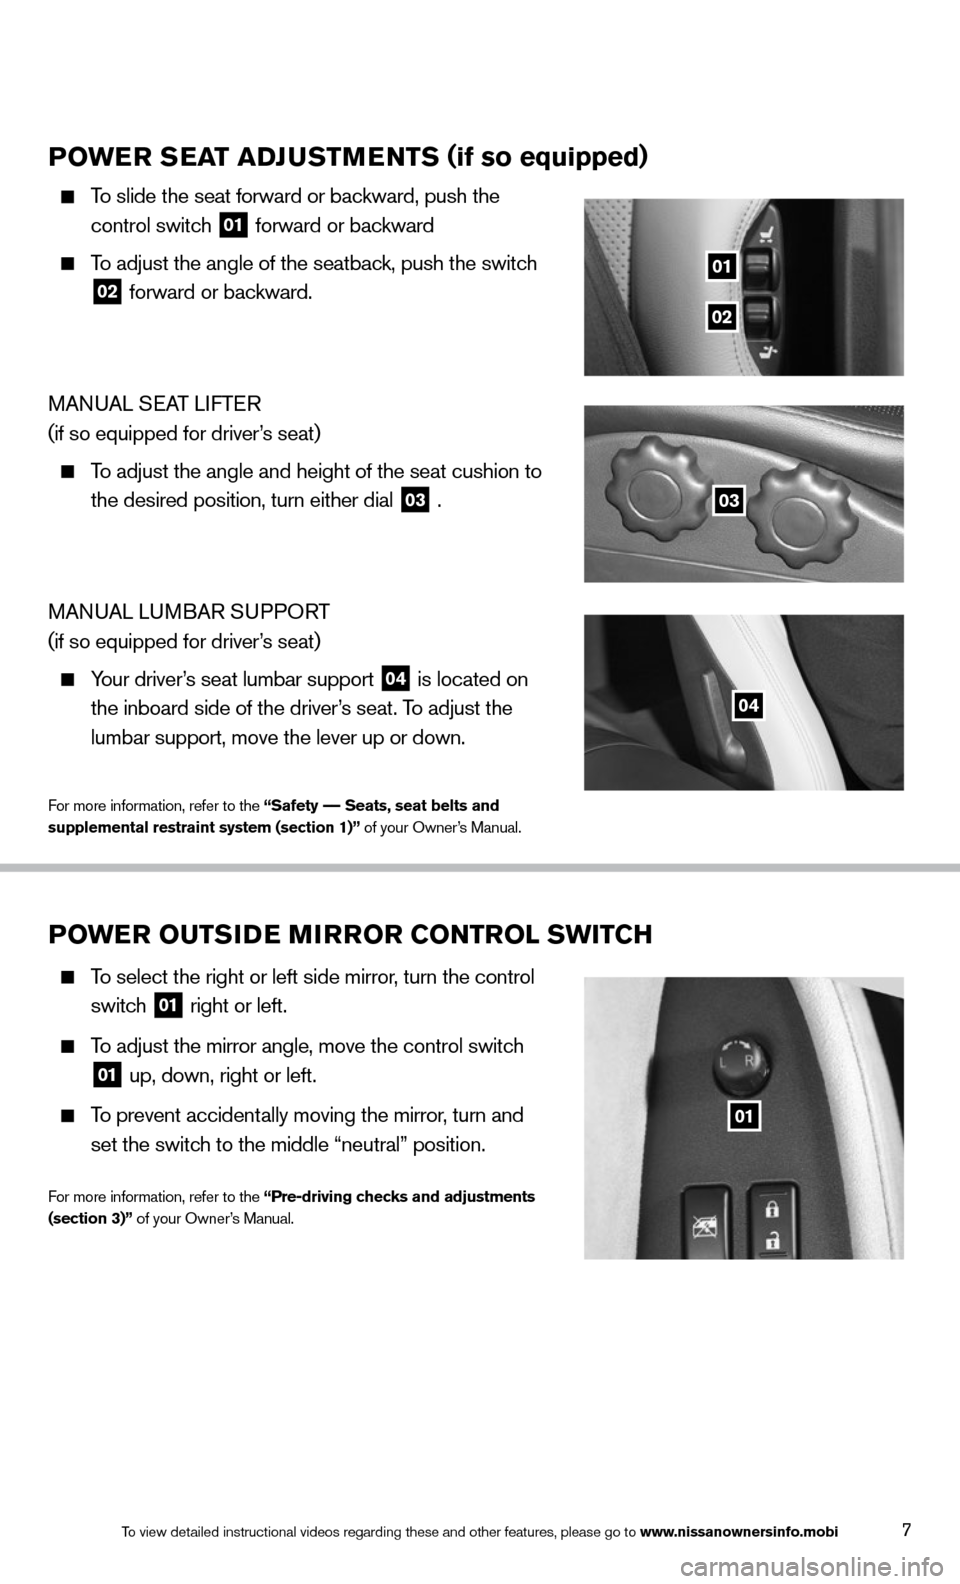 NISSAN 370Z COUPE 2014 Z34 Quick Reference Guide 7
POWER SEAT ADJUSTMENTS (if so equipped)
    To slide the seat forward or backward, push the   
control switch  
01 forward or backward
 
    To adjust the angle of the seatback, push the switch   
0